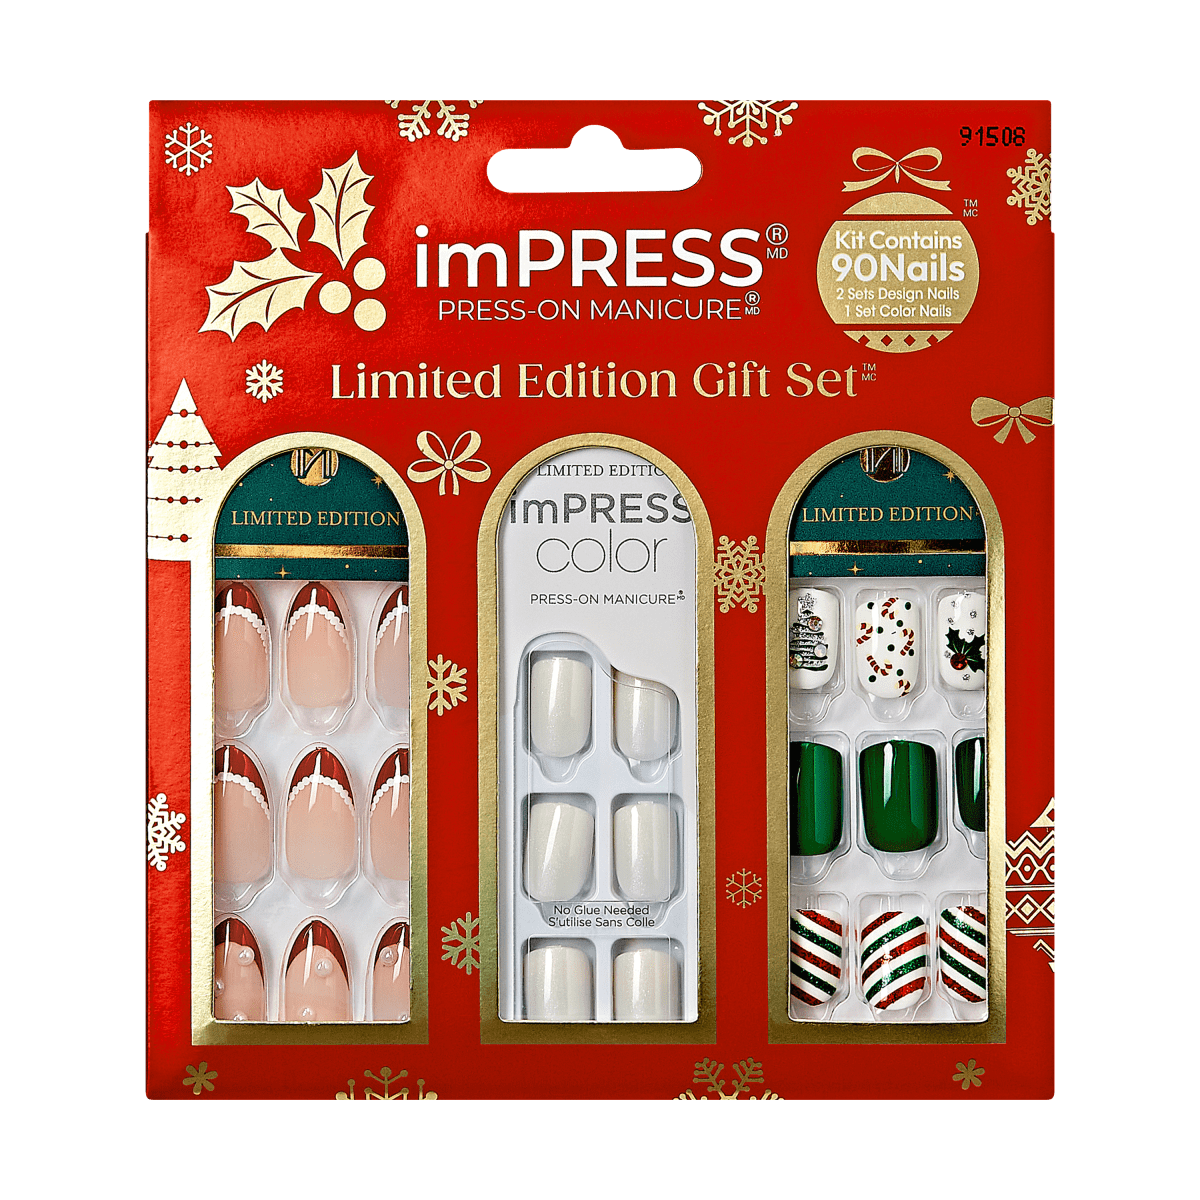 imPRESS Limited Edition Holiday Gift Set 02